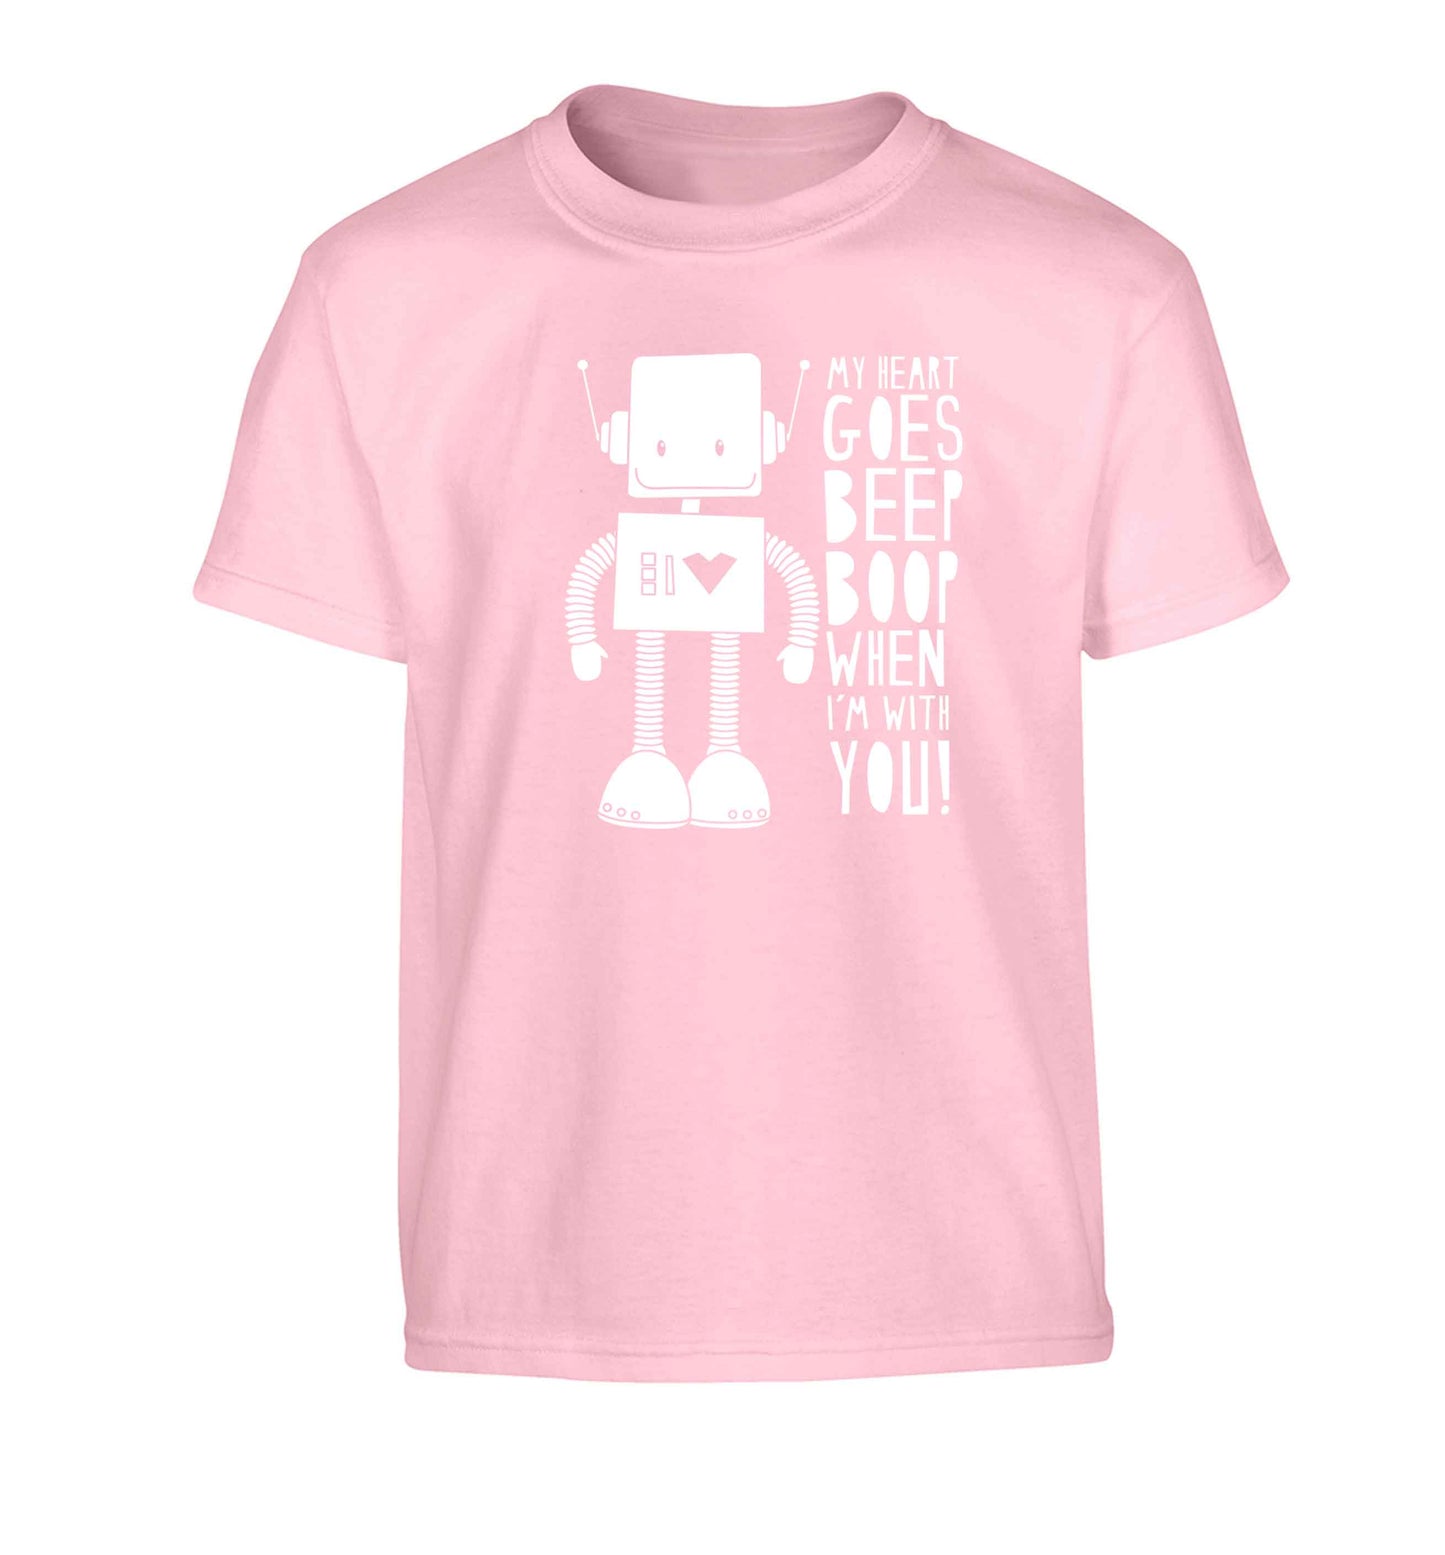 My heart goes beep boop when I'm with you Children's light pink Tshirt 12-13 Years